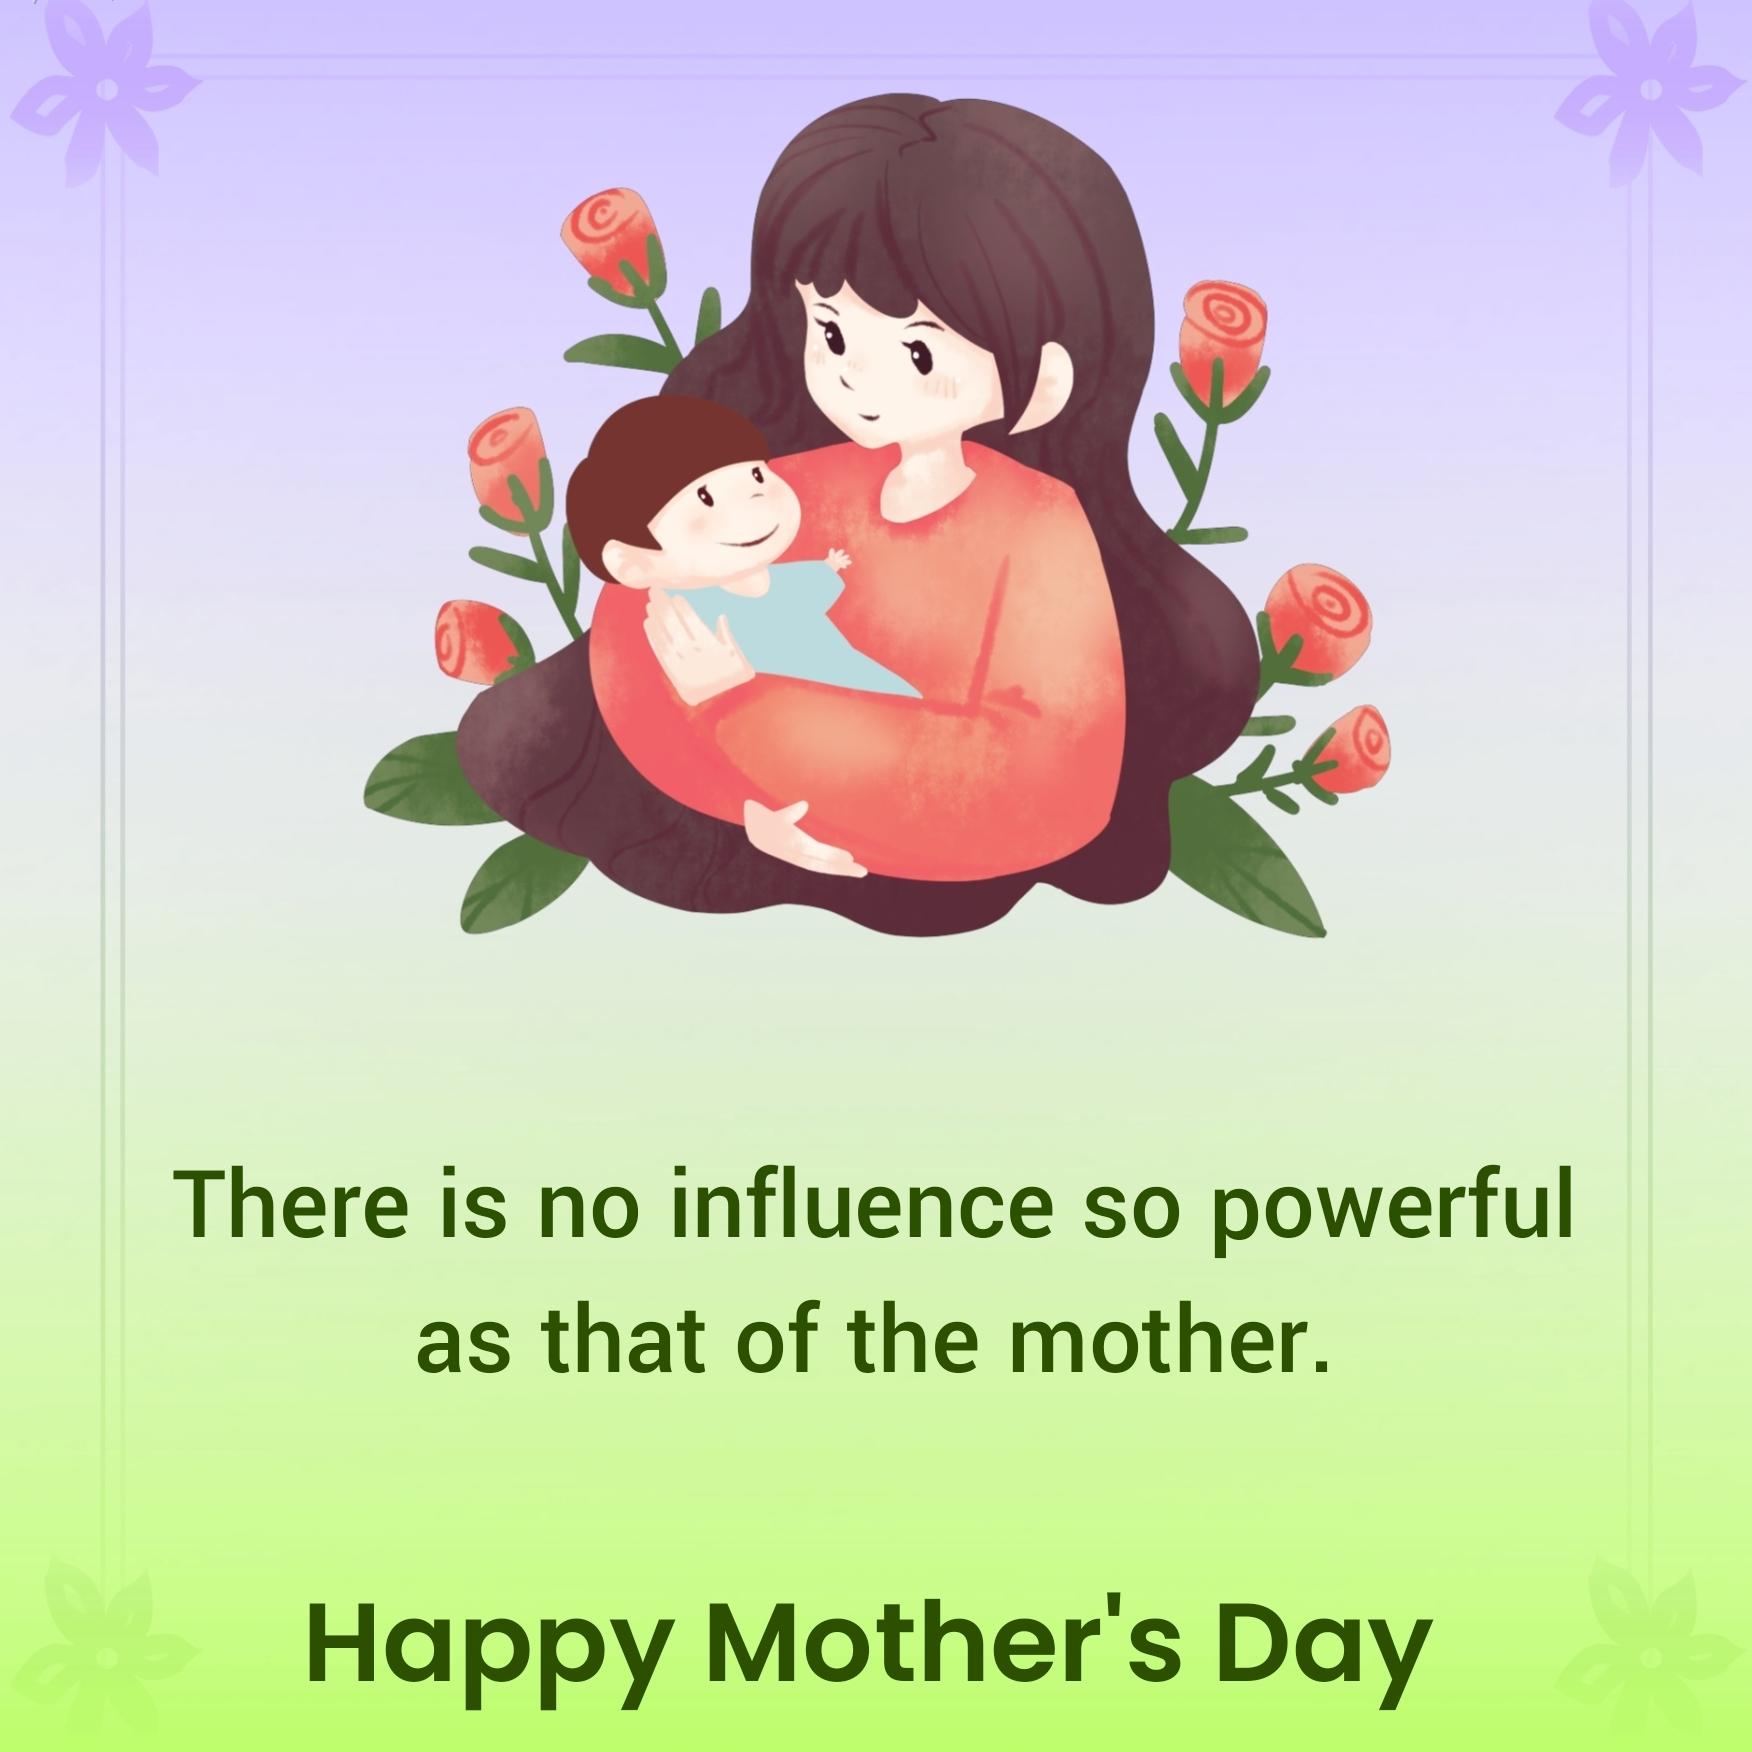 There is no influence so powerful as that of the mother